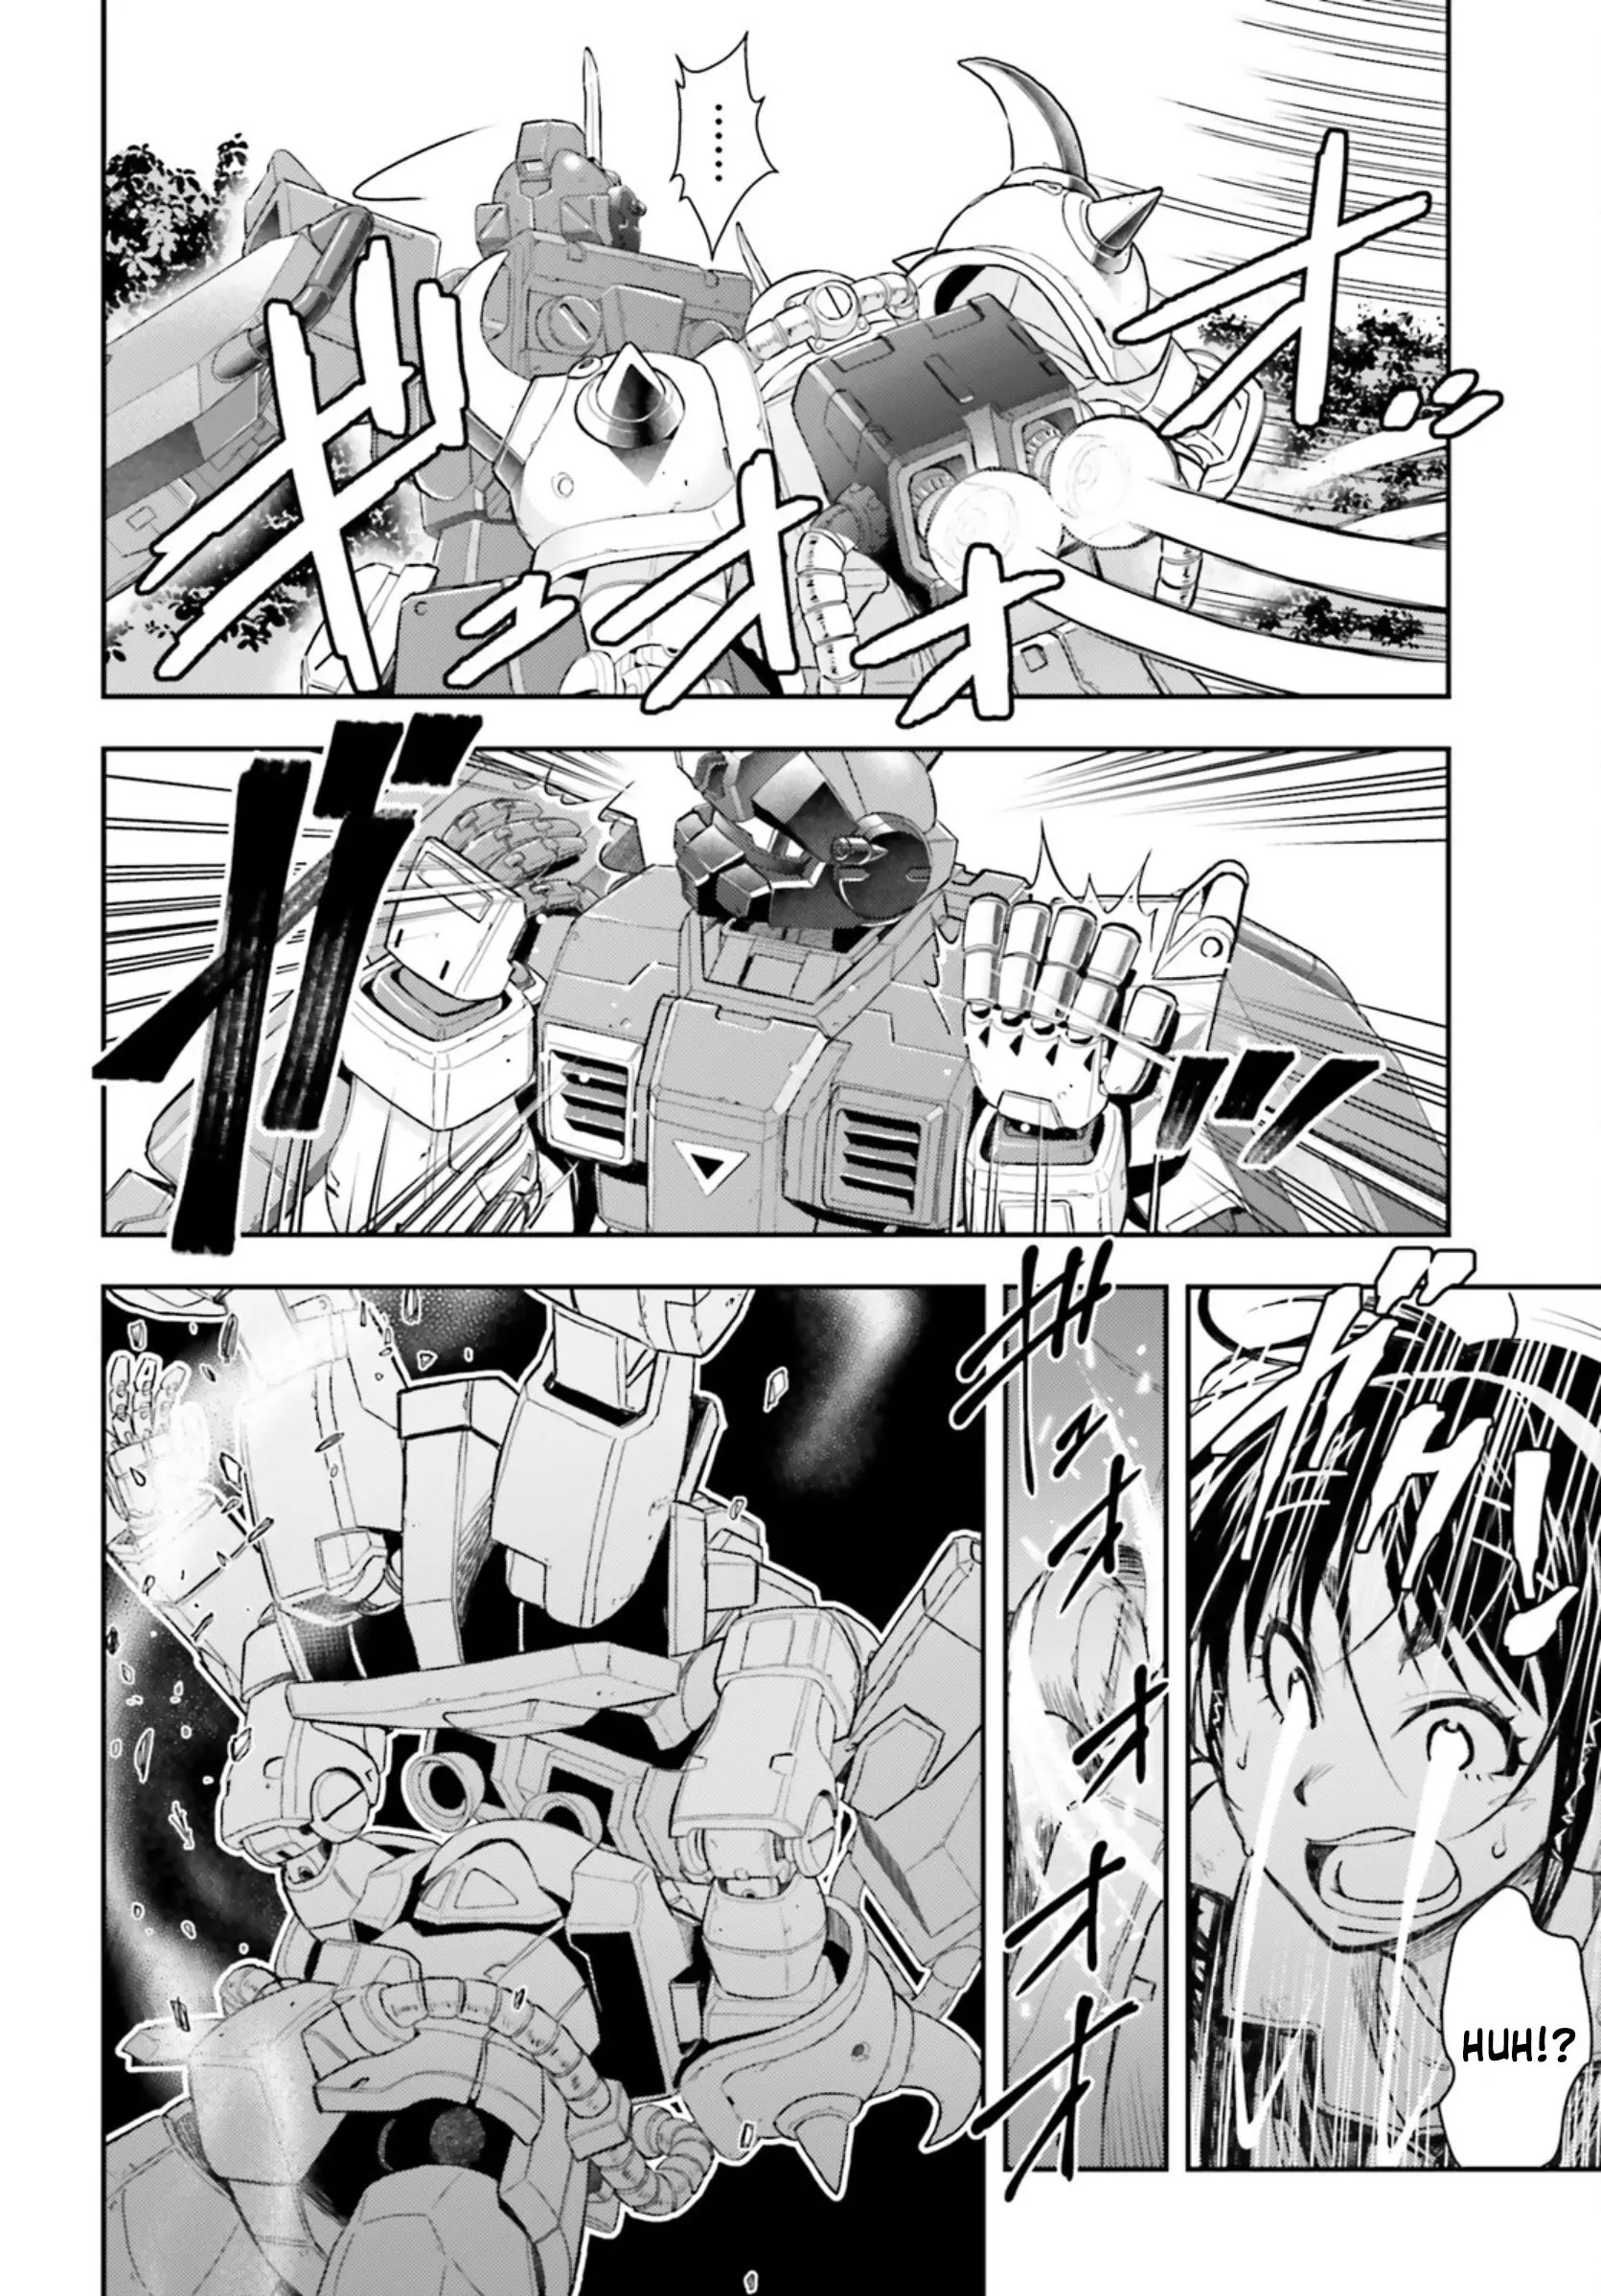 Mobile Suit Gundam: Red Giant 03Rd Ms Team - 8 page 33-f3f5dff1